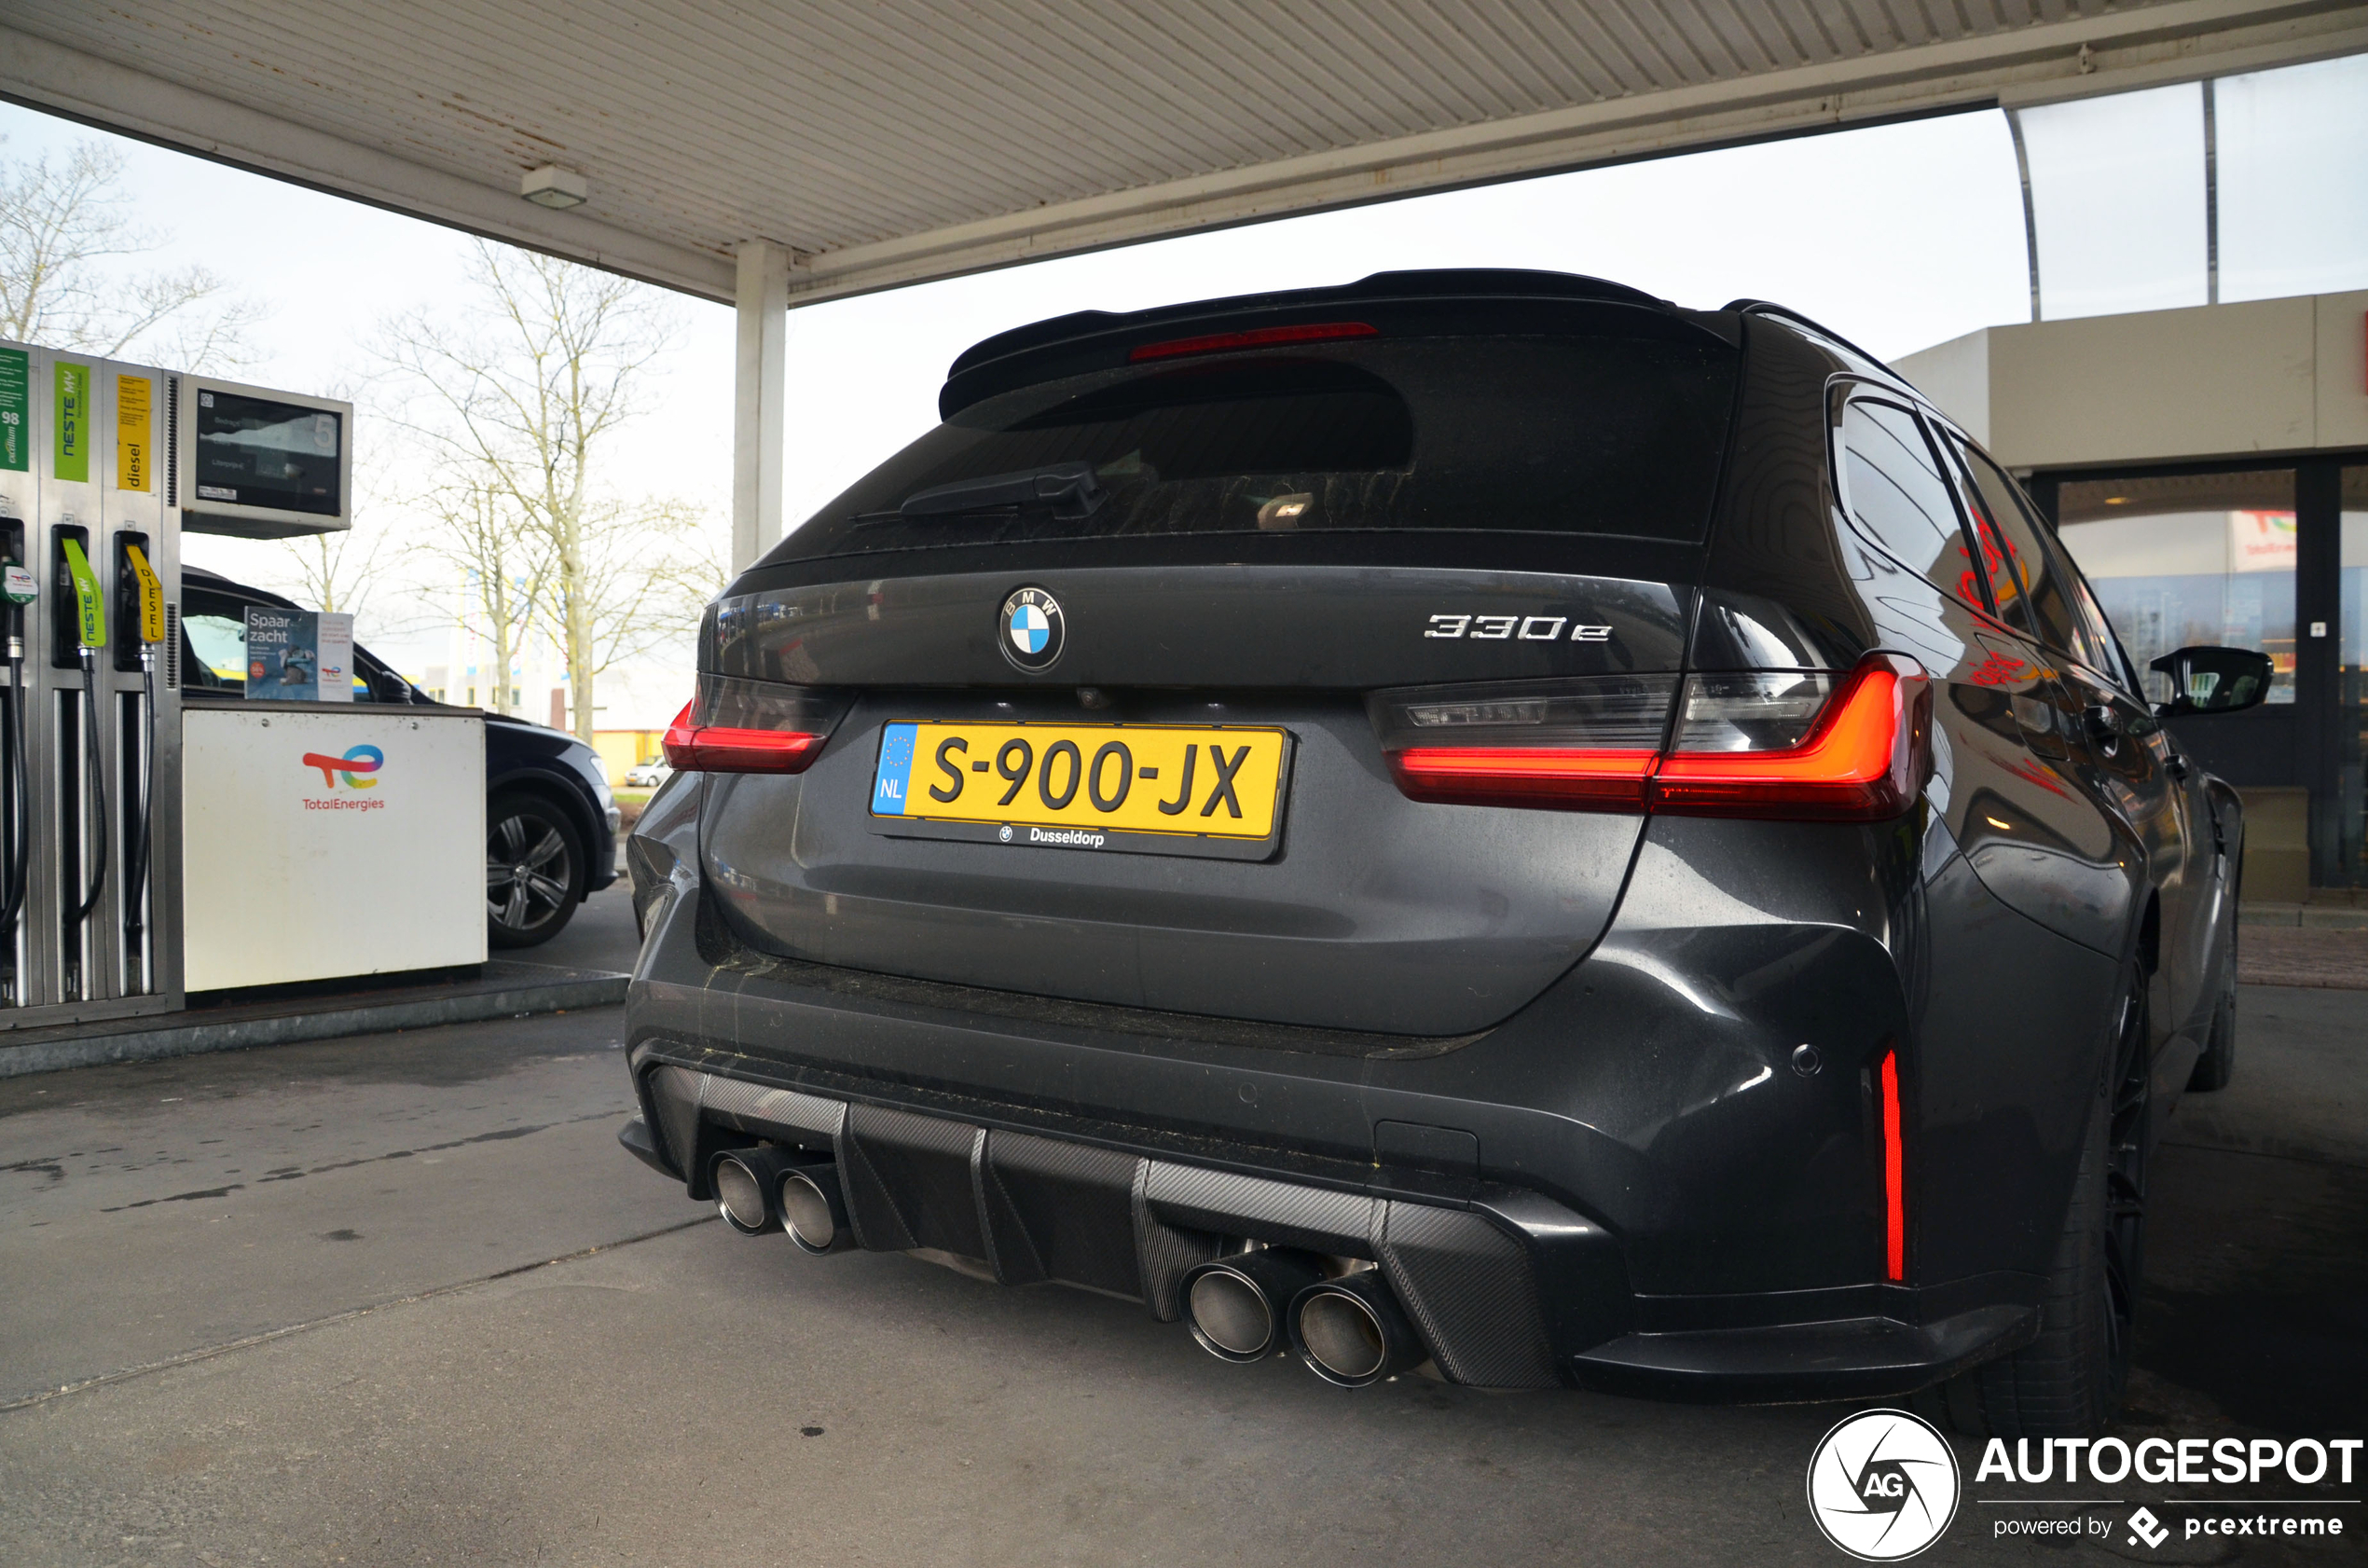 BMW 330e Touring fopt ons niet